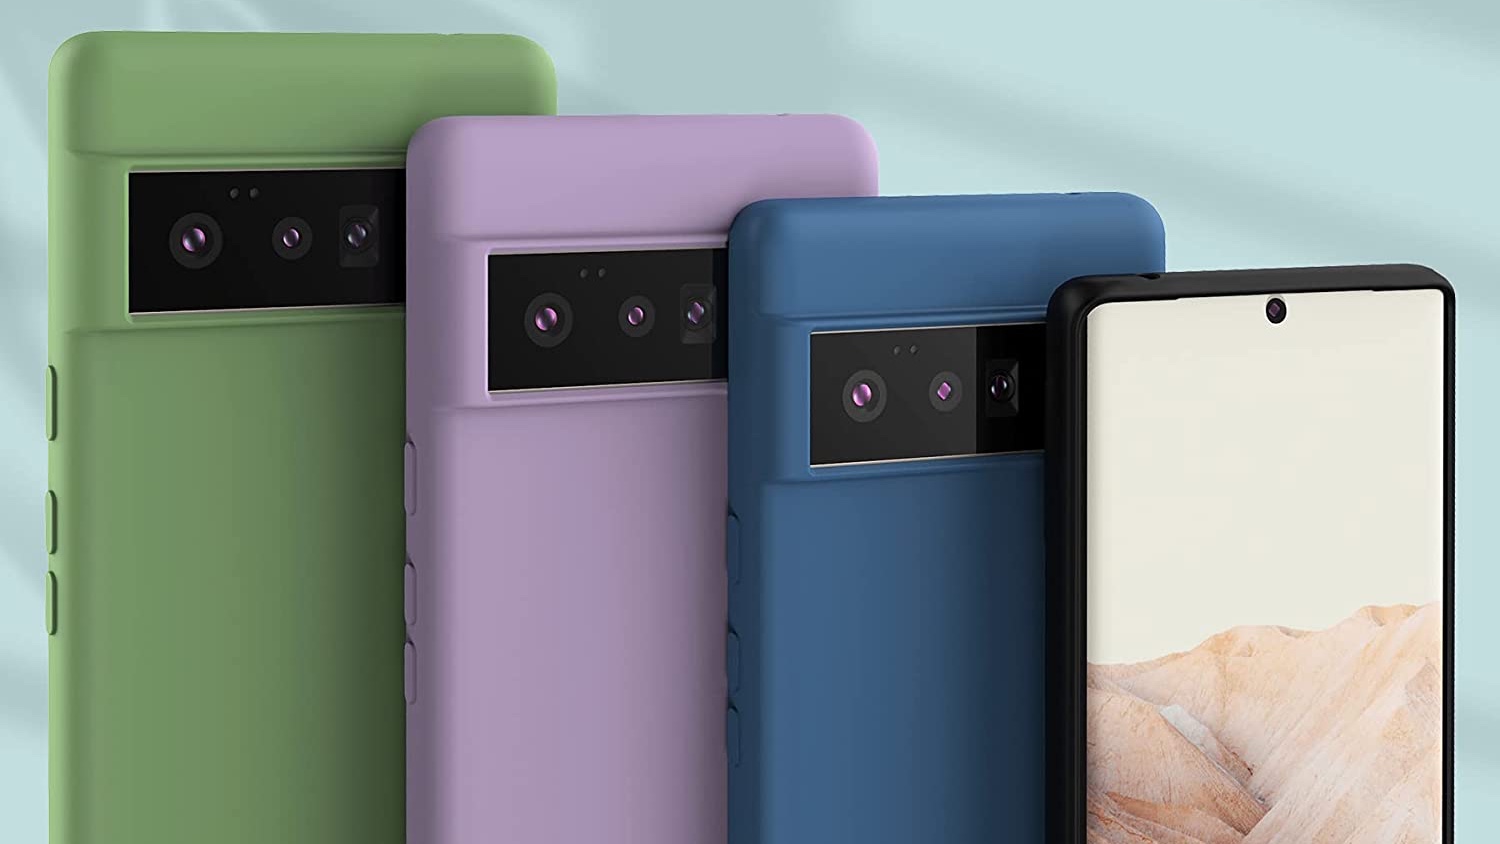 Feitenn Silicone Case for Pixel 6 Pro has colorful options